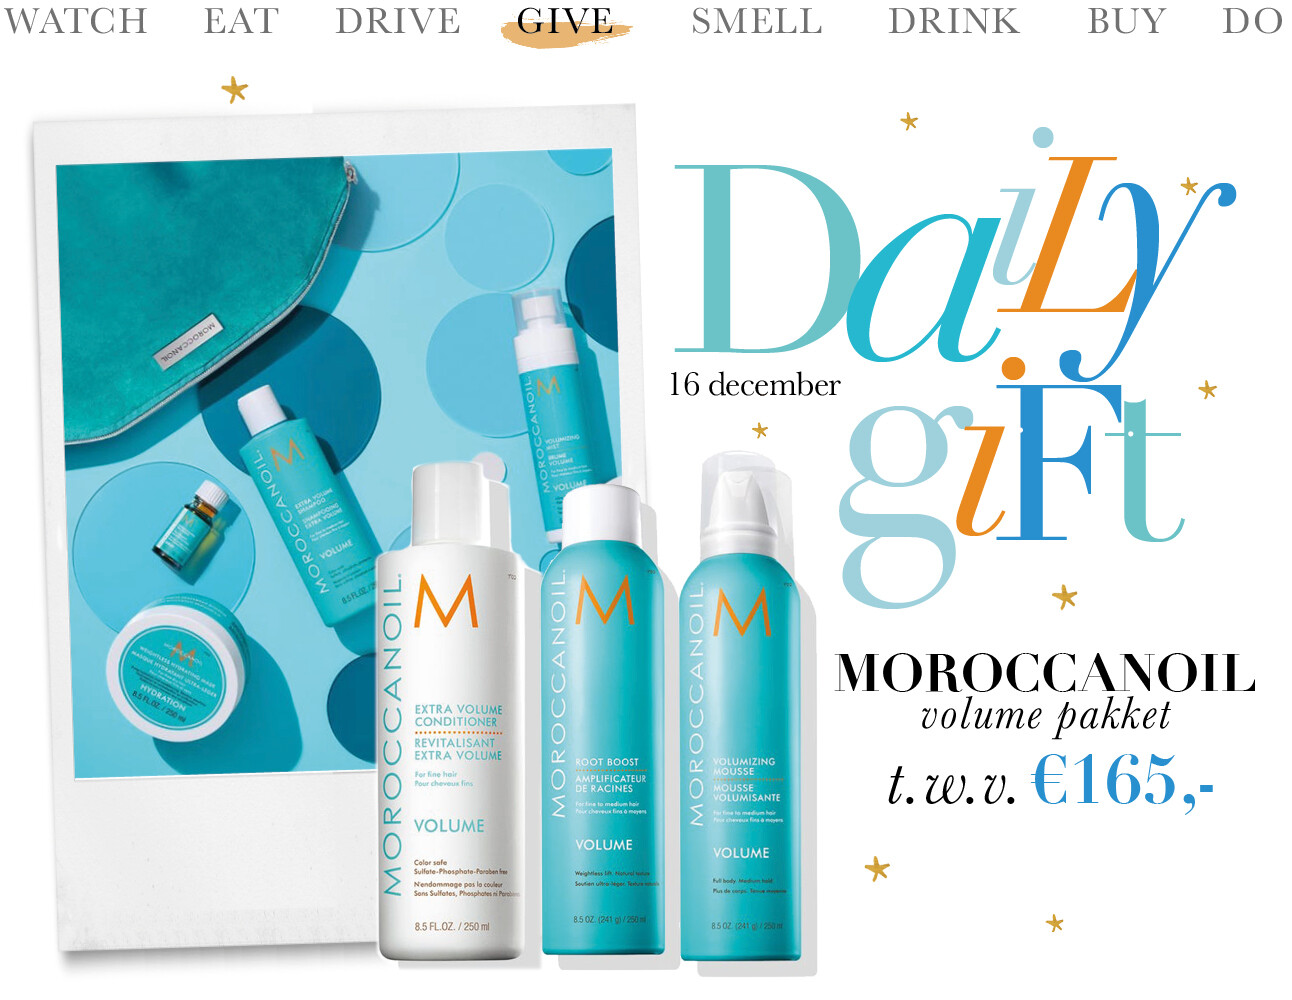 Today We Give Moroccanoil pakket